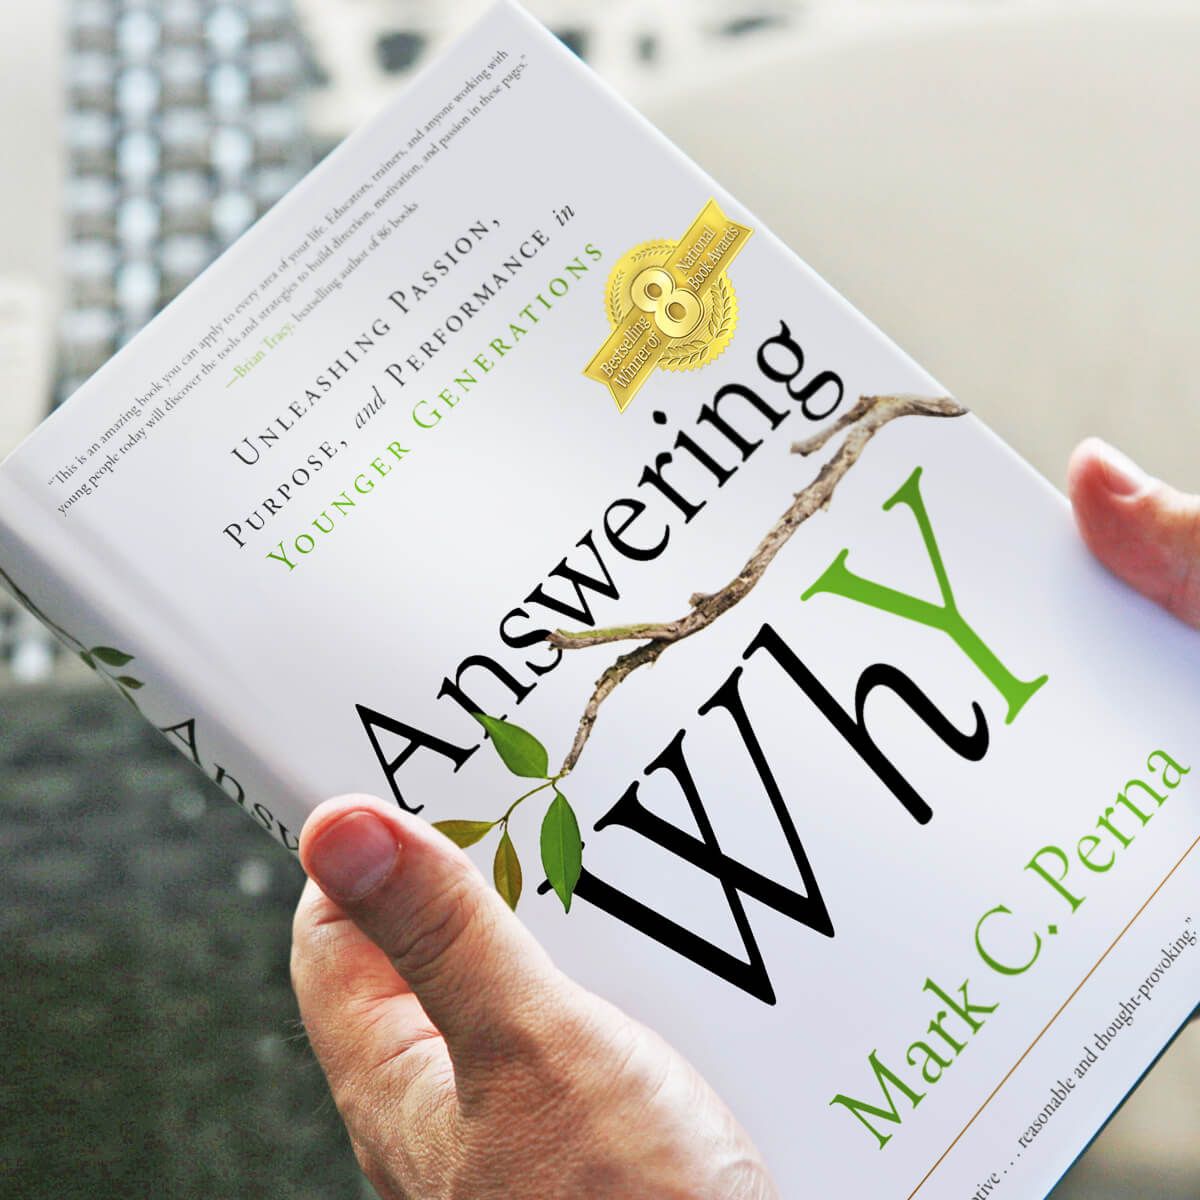 Is Answering Why on your summer reading list?

#AnsweringWhy #YoungerGeneration #SummerReading